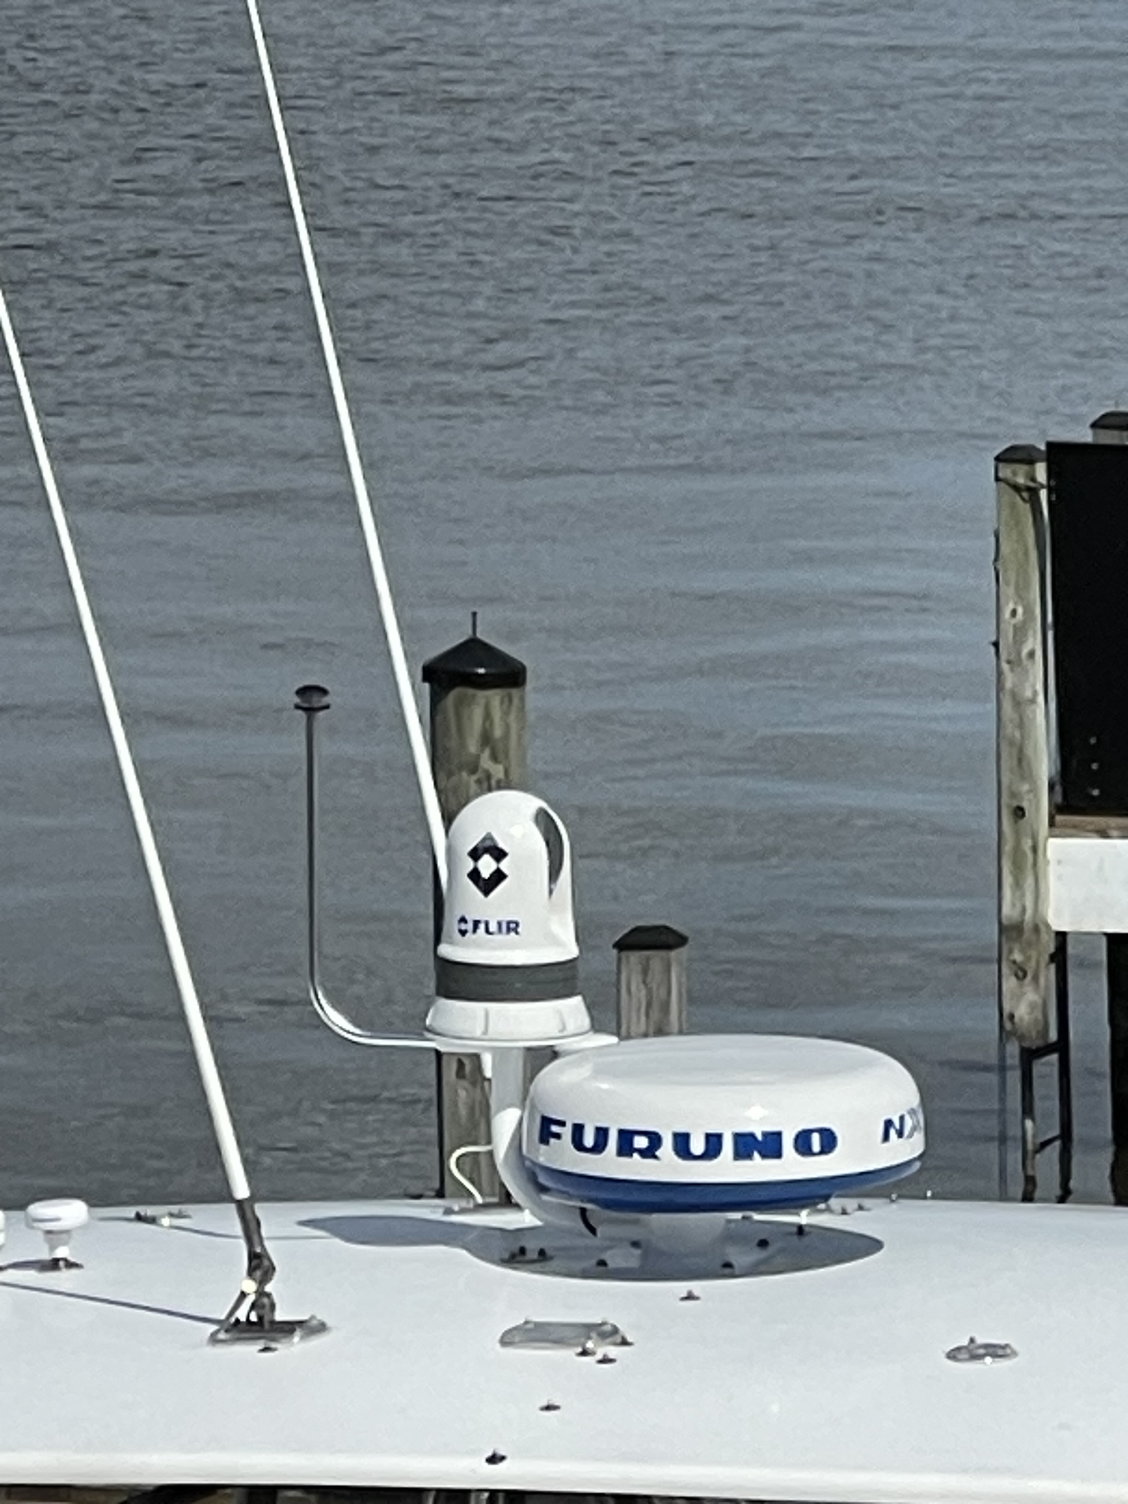 Flir camera mounted next to Radar - The Hull Truth - Boating and